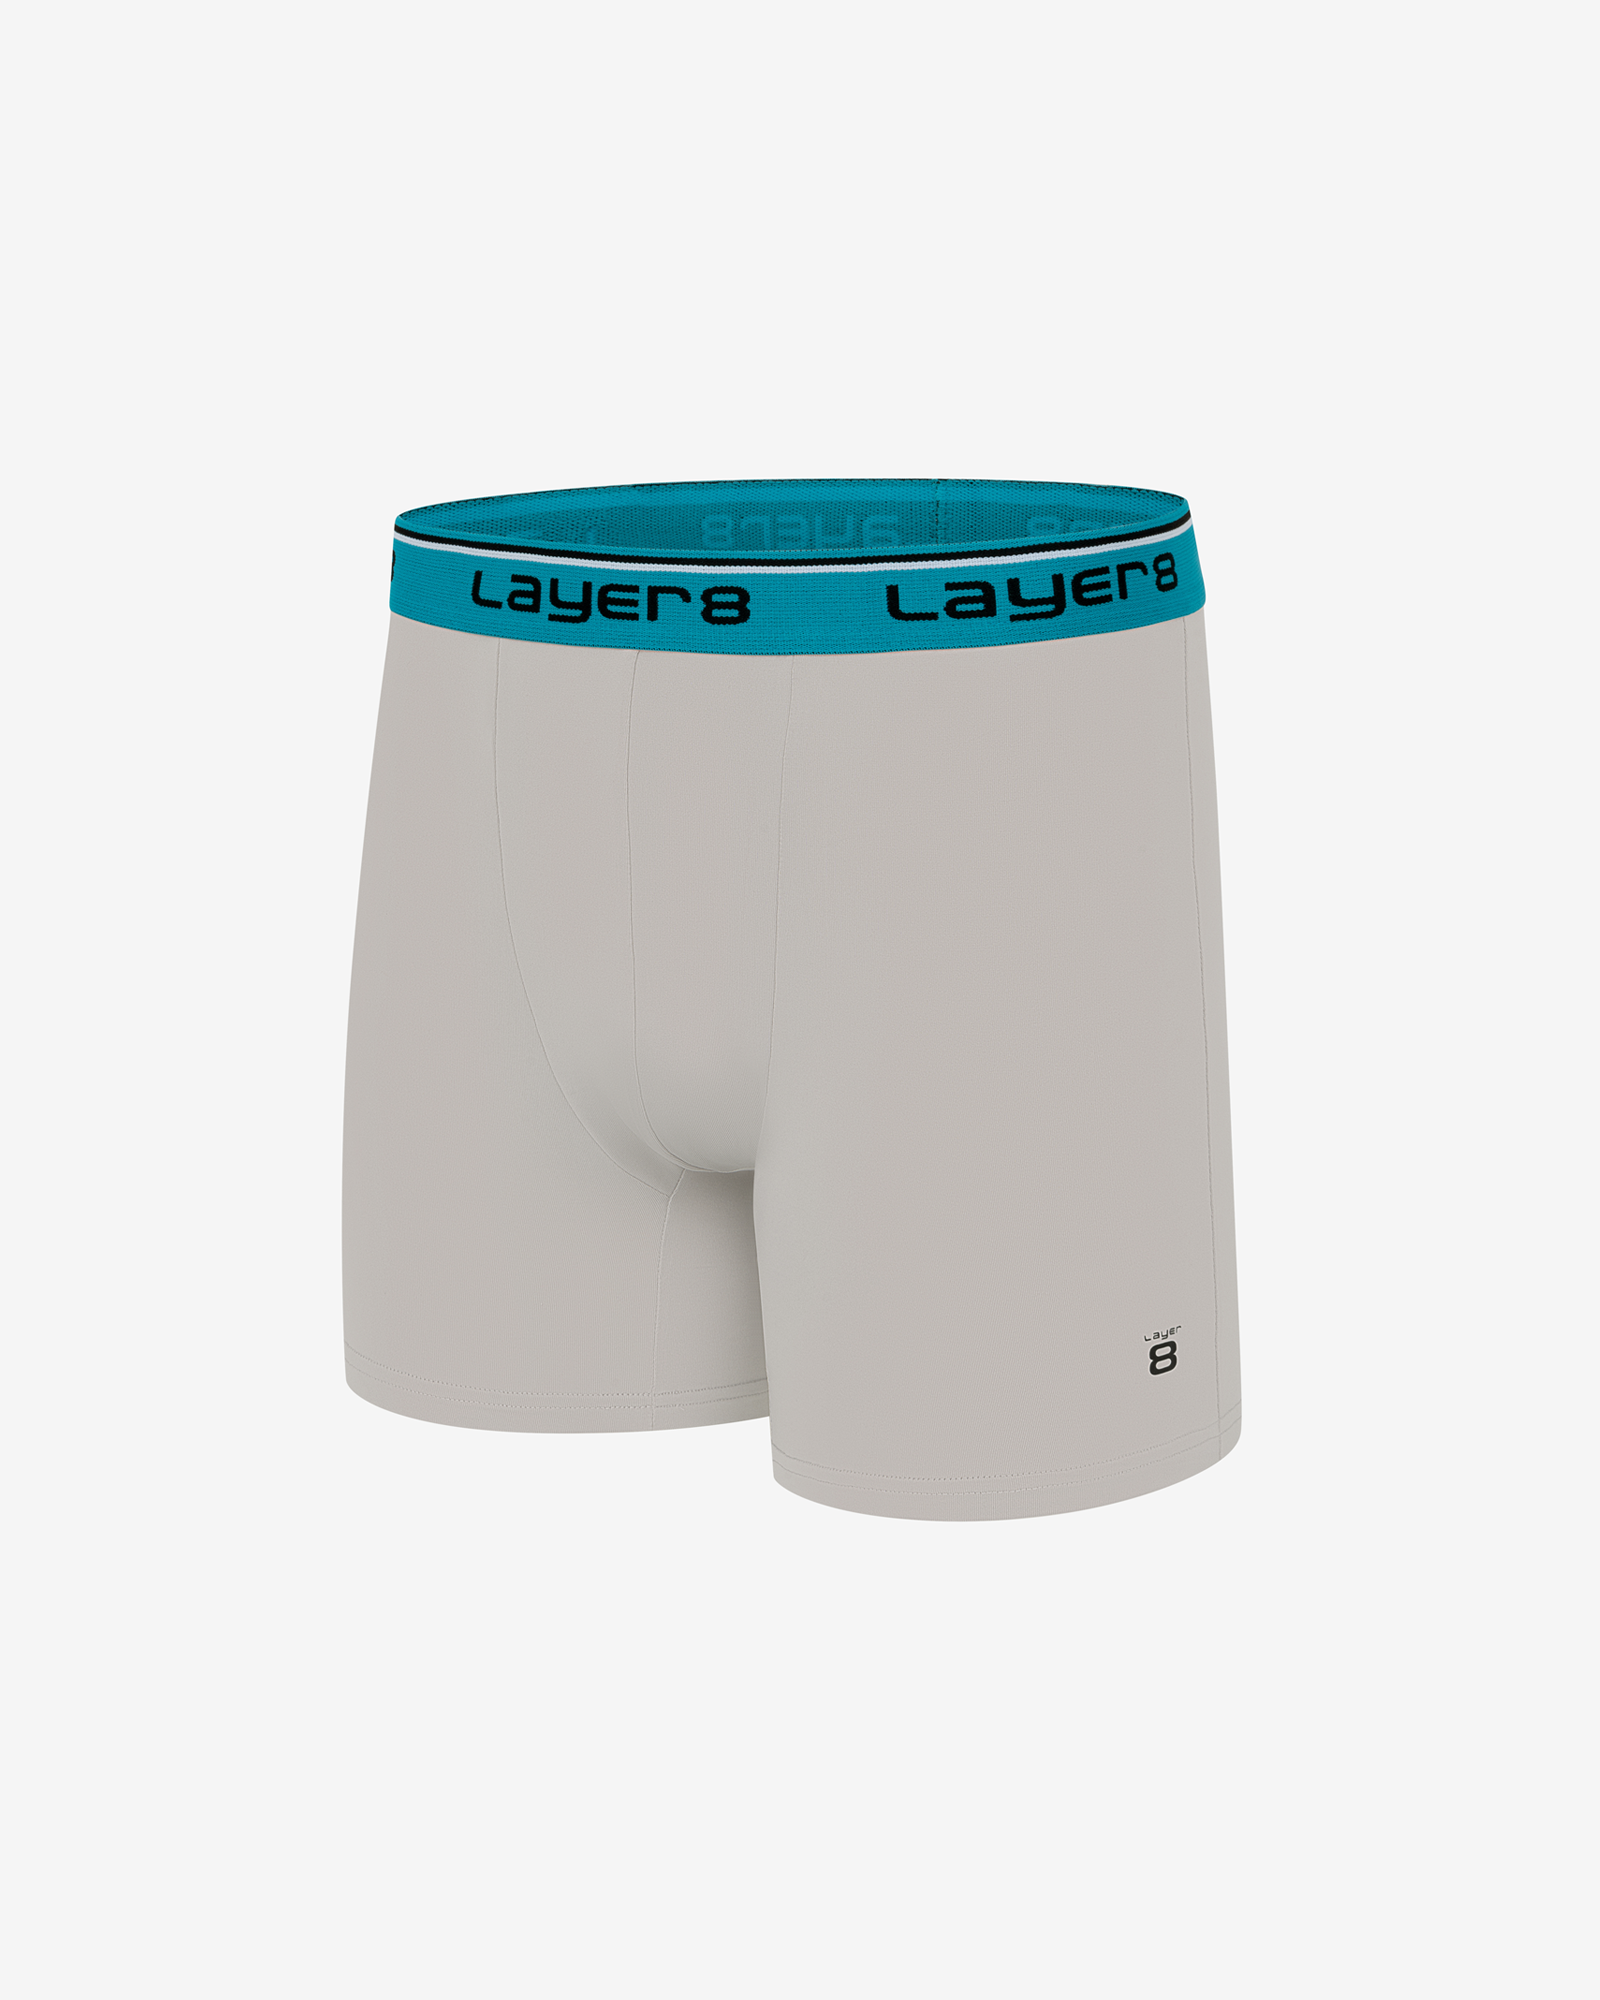 Performance Boxer Brief (4-Pack Box) – Layer 8